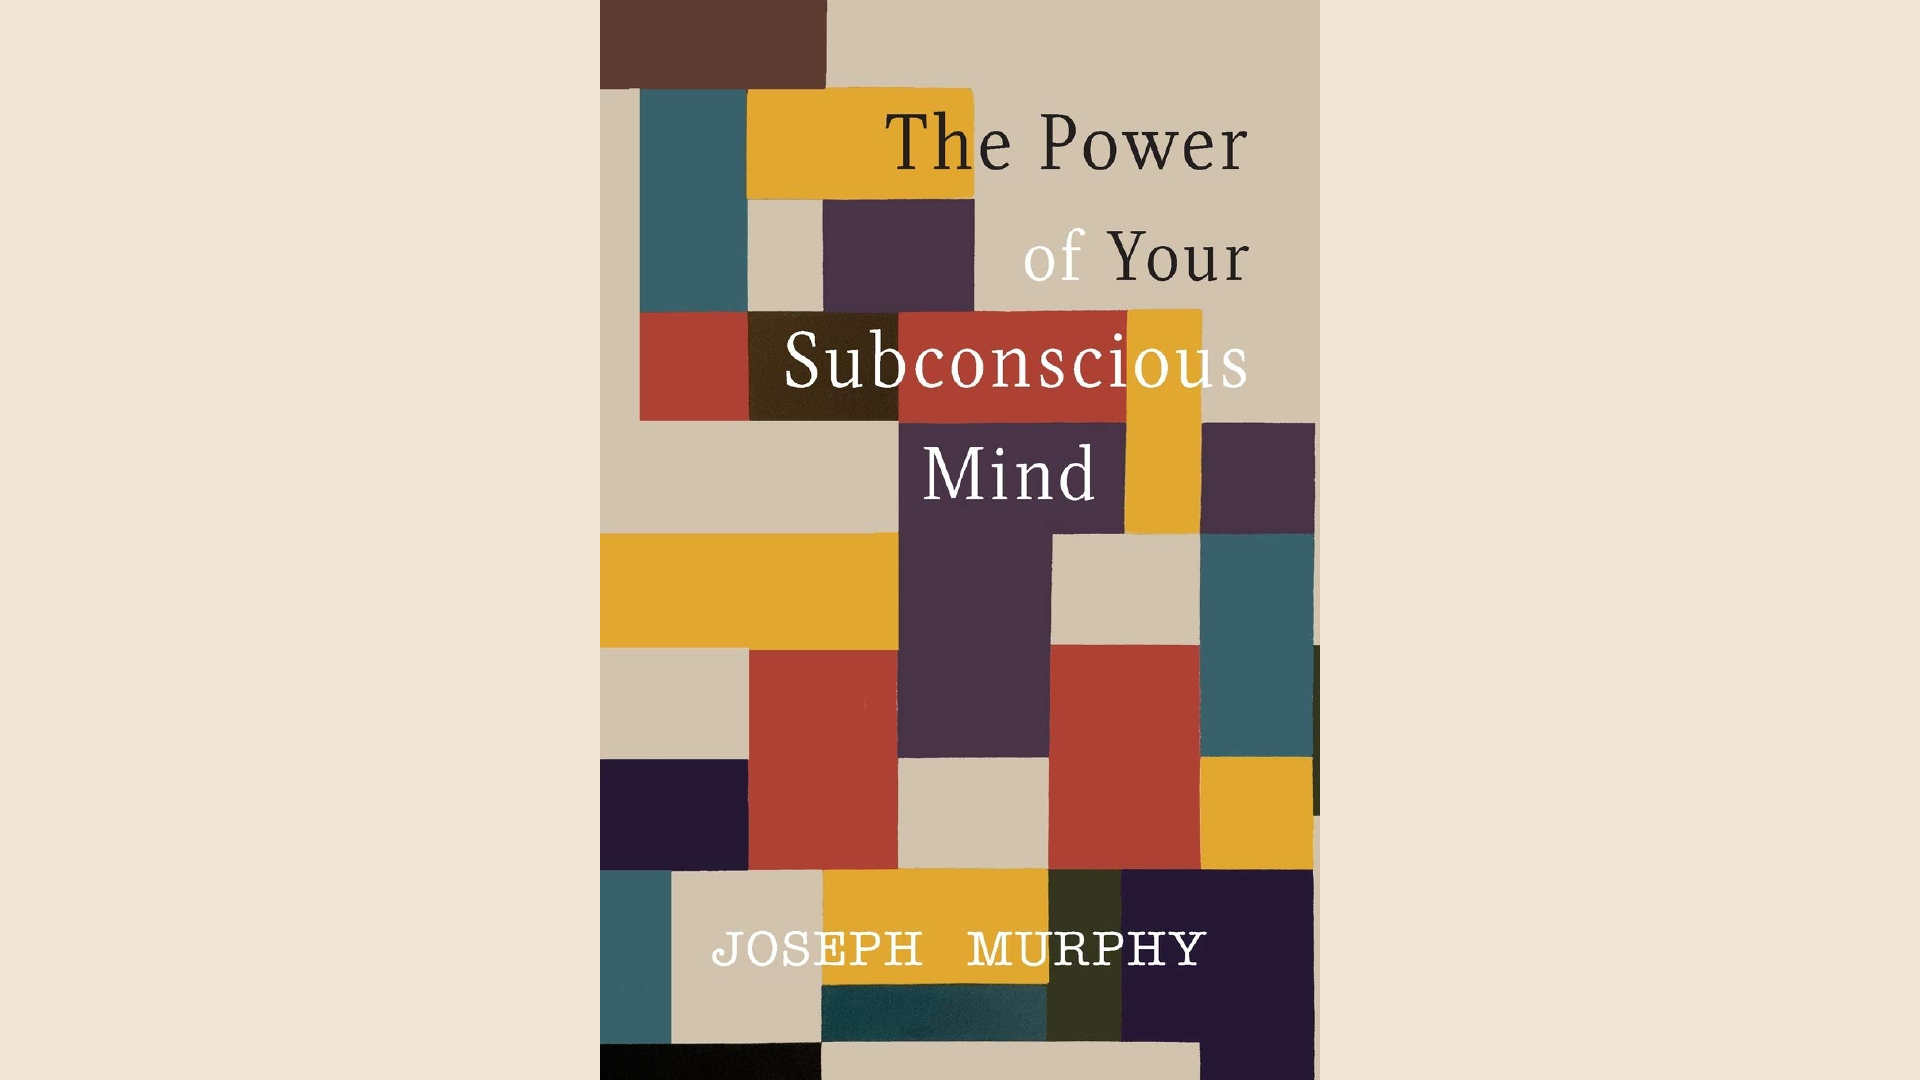 Summary: The Power of Your Subconscious Mind by Joseph Murphy